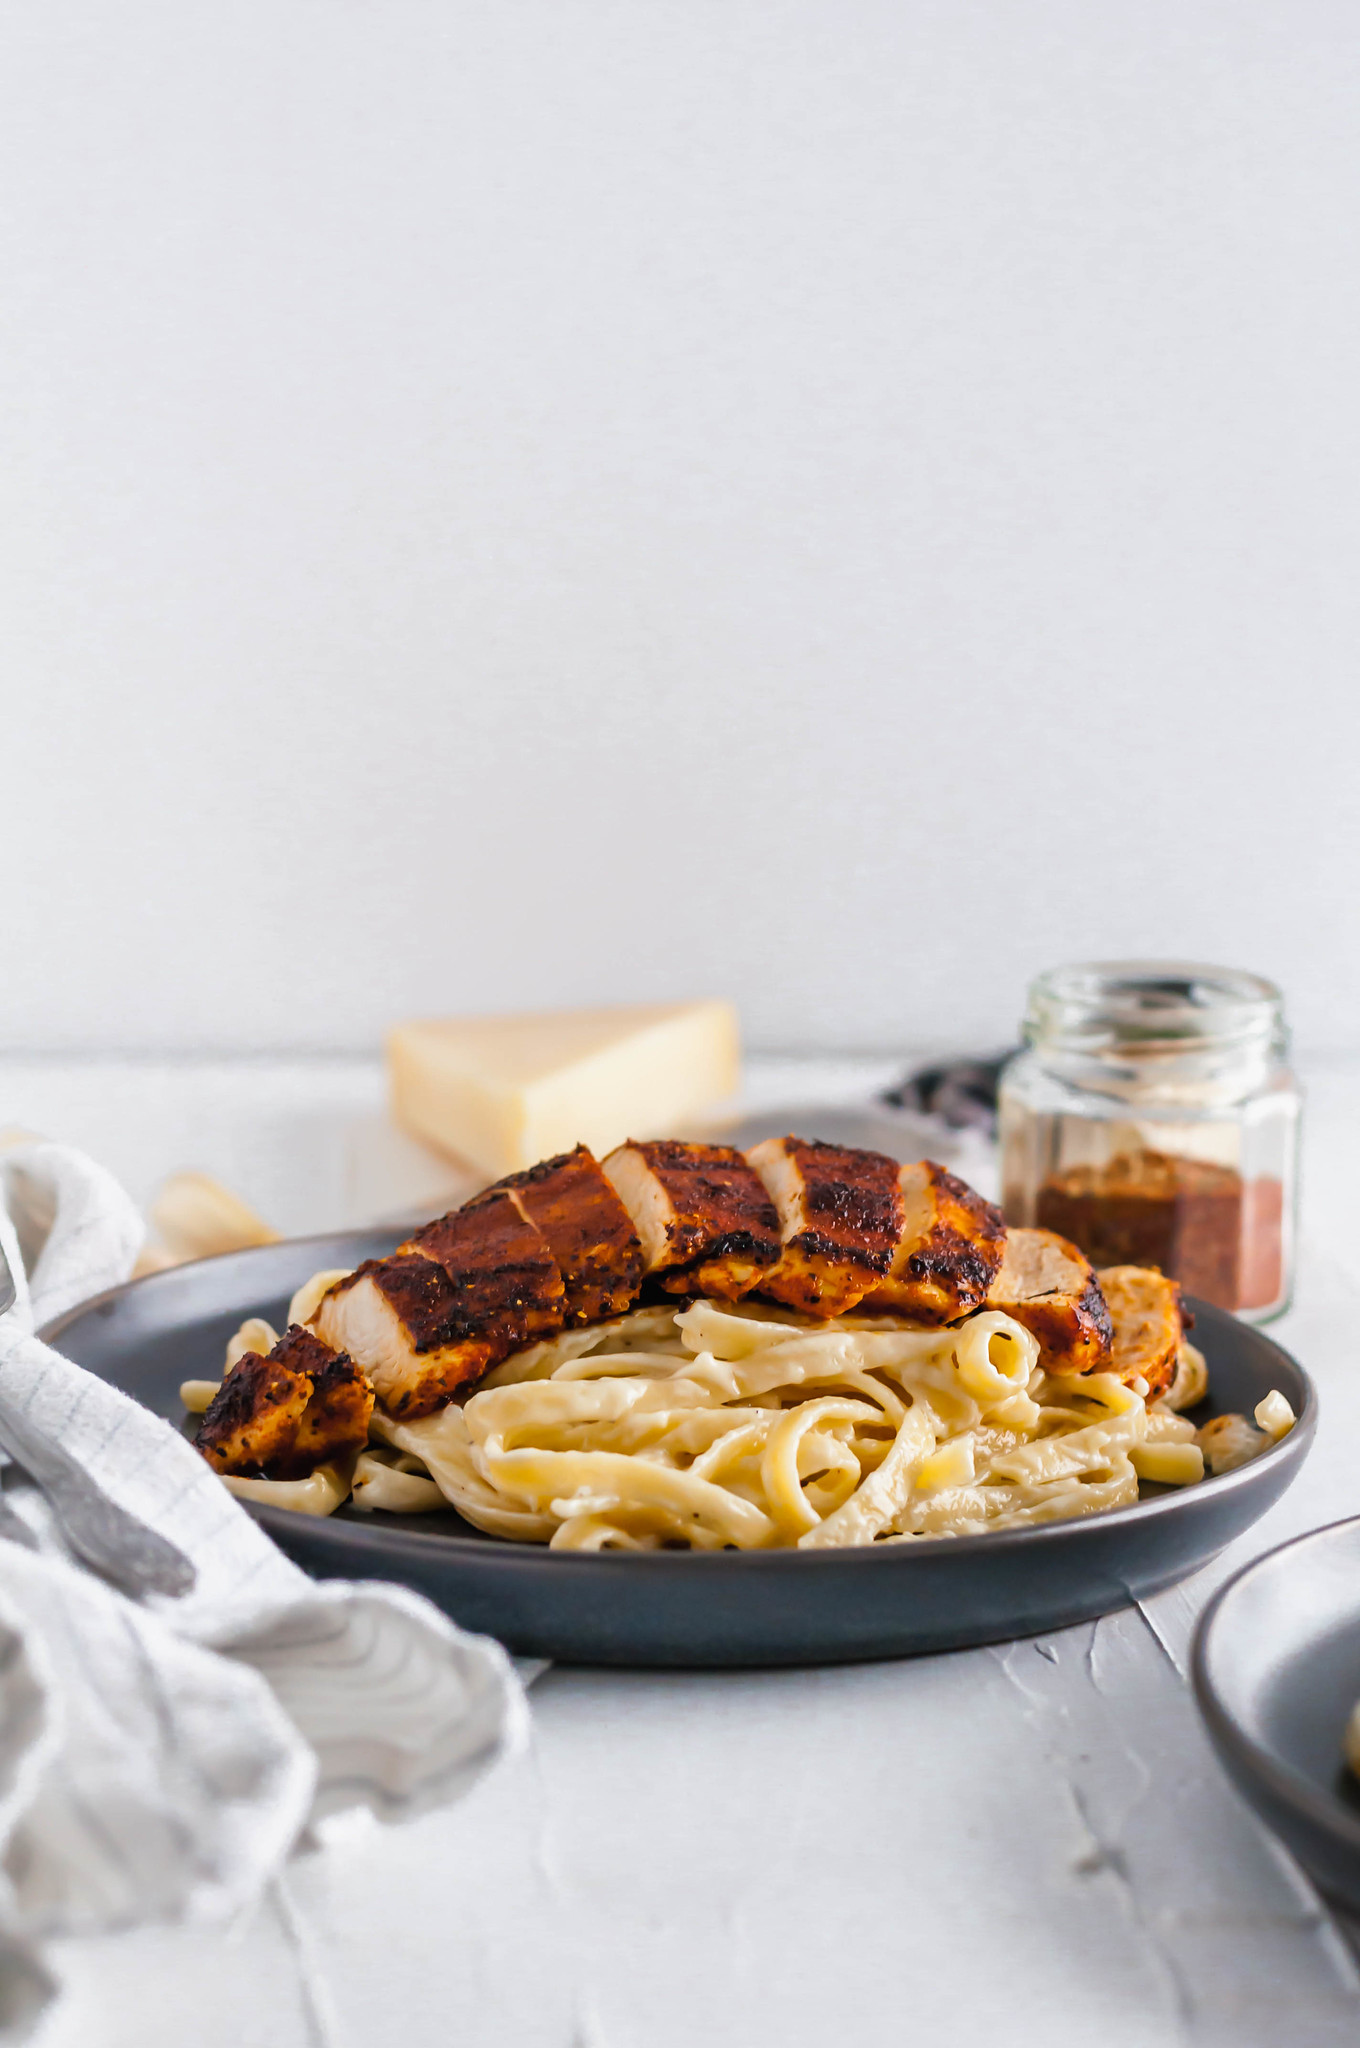 This Blackened Chicken Alfredo is the ultimate weeknight meal. Done in 30 minutes and packed with flavor. Easy enough for any weeknight but fancy enough for guests too. Homemade blackening seasoning covered tender chicken cutlets served over simple, cheesy homemade fettucine alfredo.